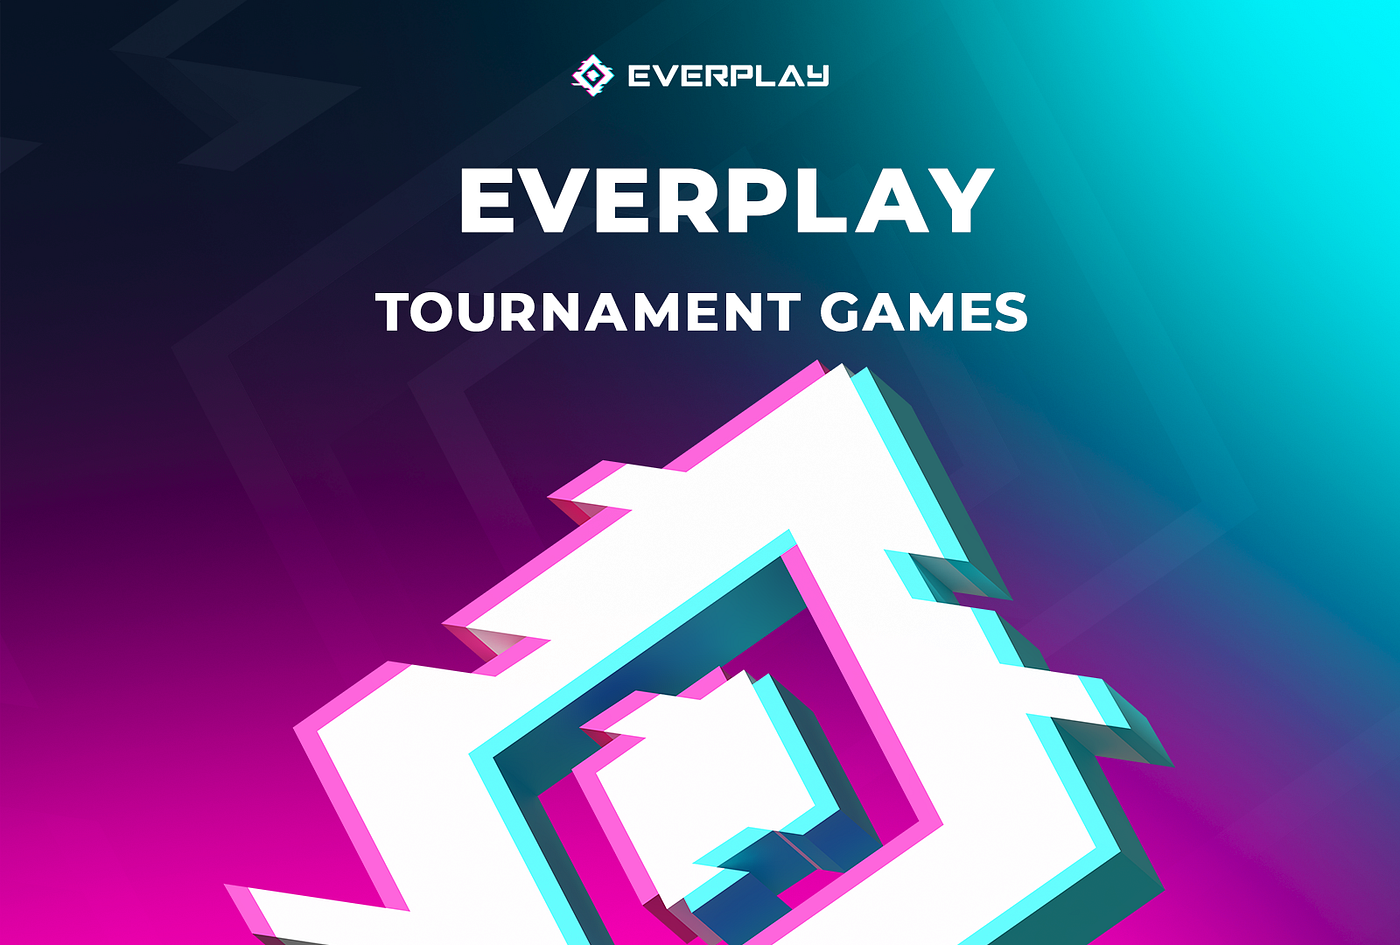 EVERPLAY tournament games. EVERPLAY is a platform for online…, by EVERPLAY